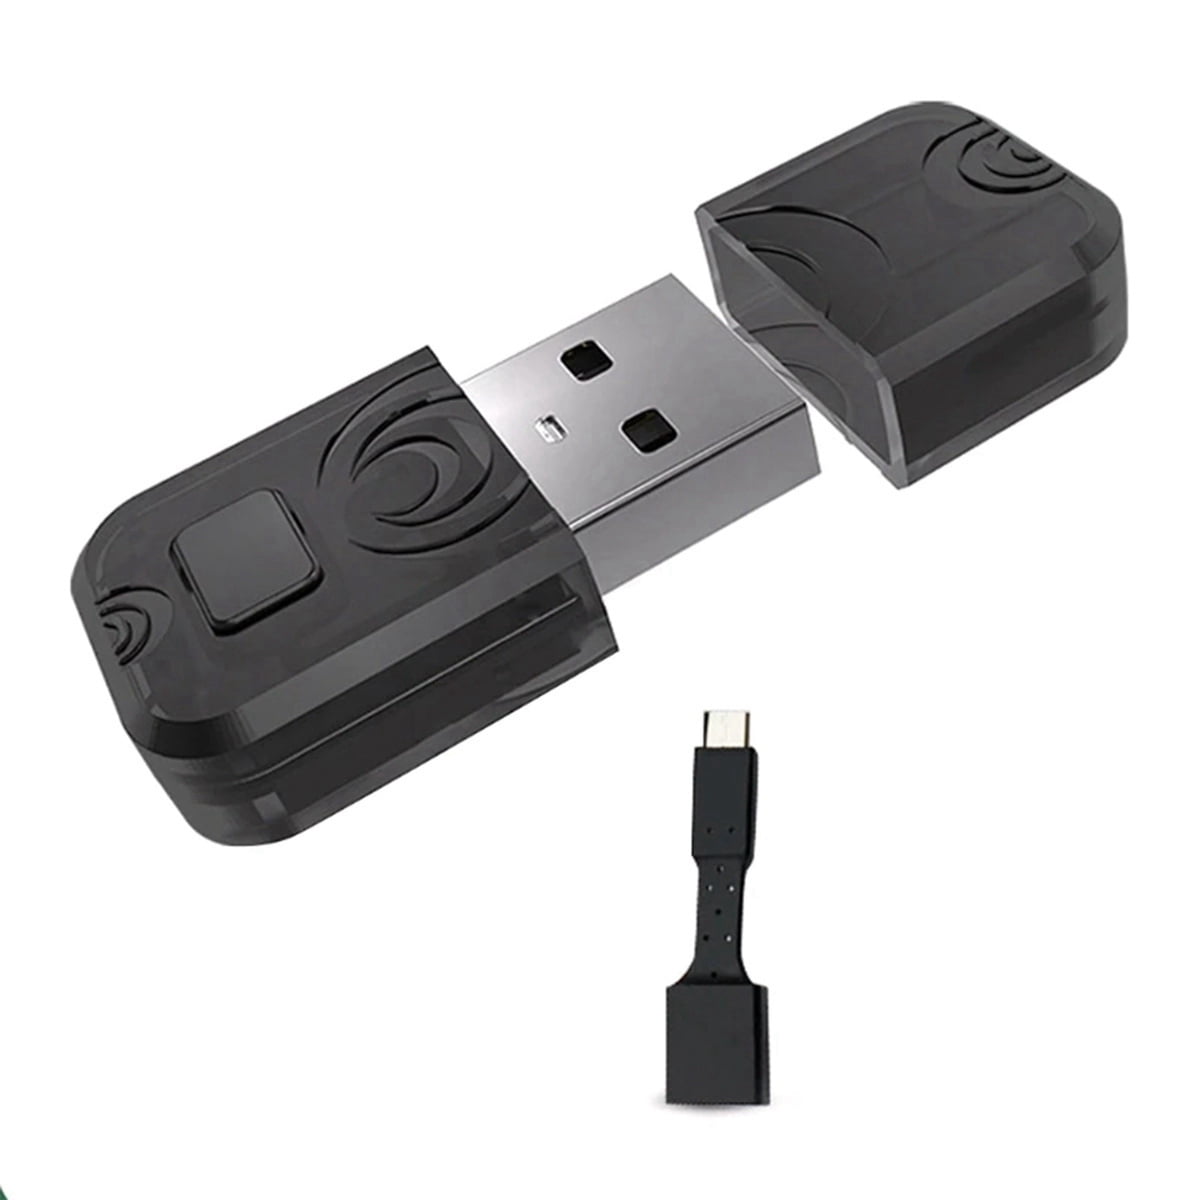 let dato redde Bluetooth Compatible Transmitter Receiver for PS5 PS4 Adapter Transmitter  for Switch PC USB Dongle Audio Adapter - Walmart.com